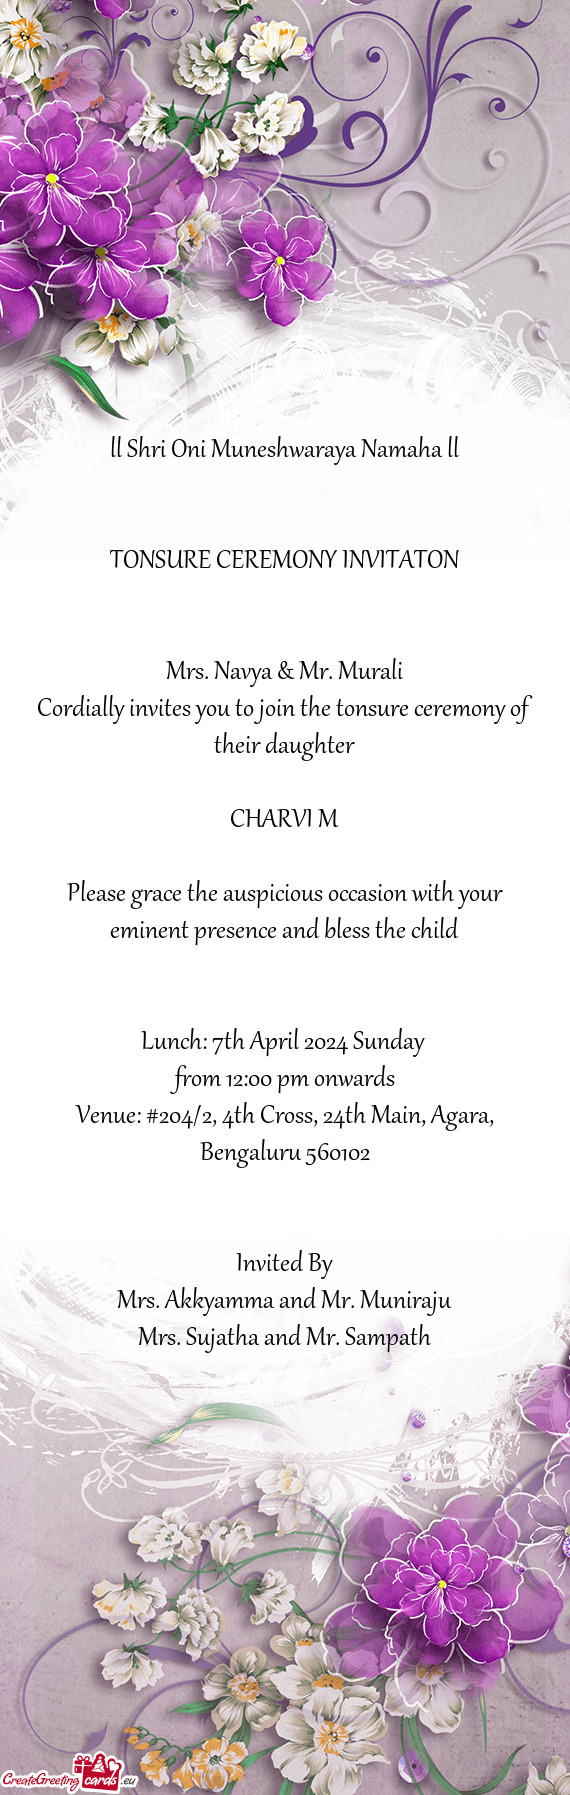 Cordially invites you to join the tonsure ceremony of their daughter